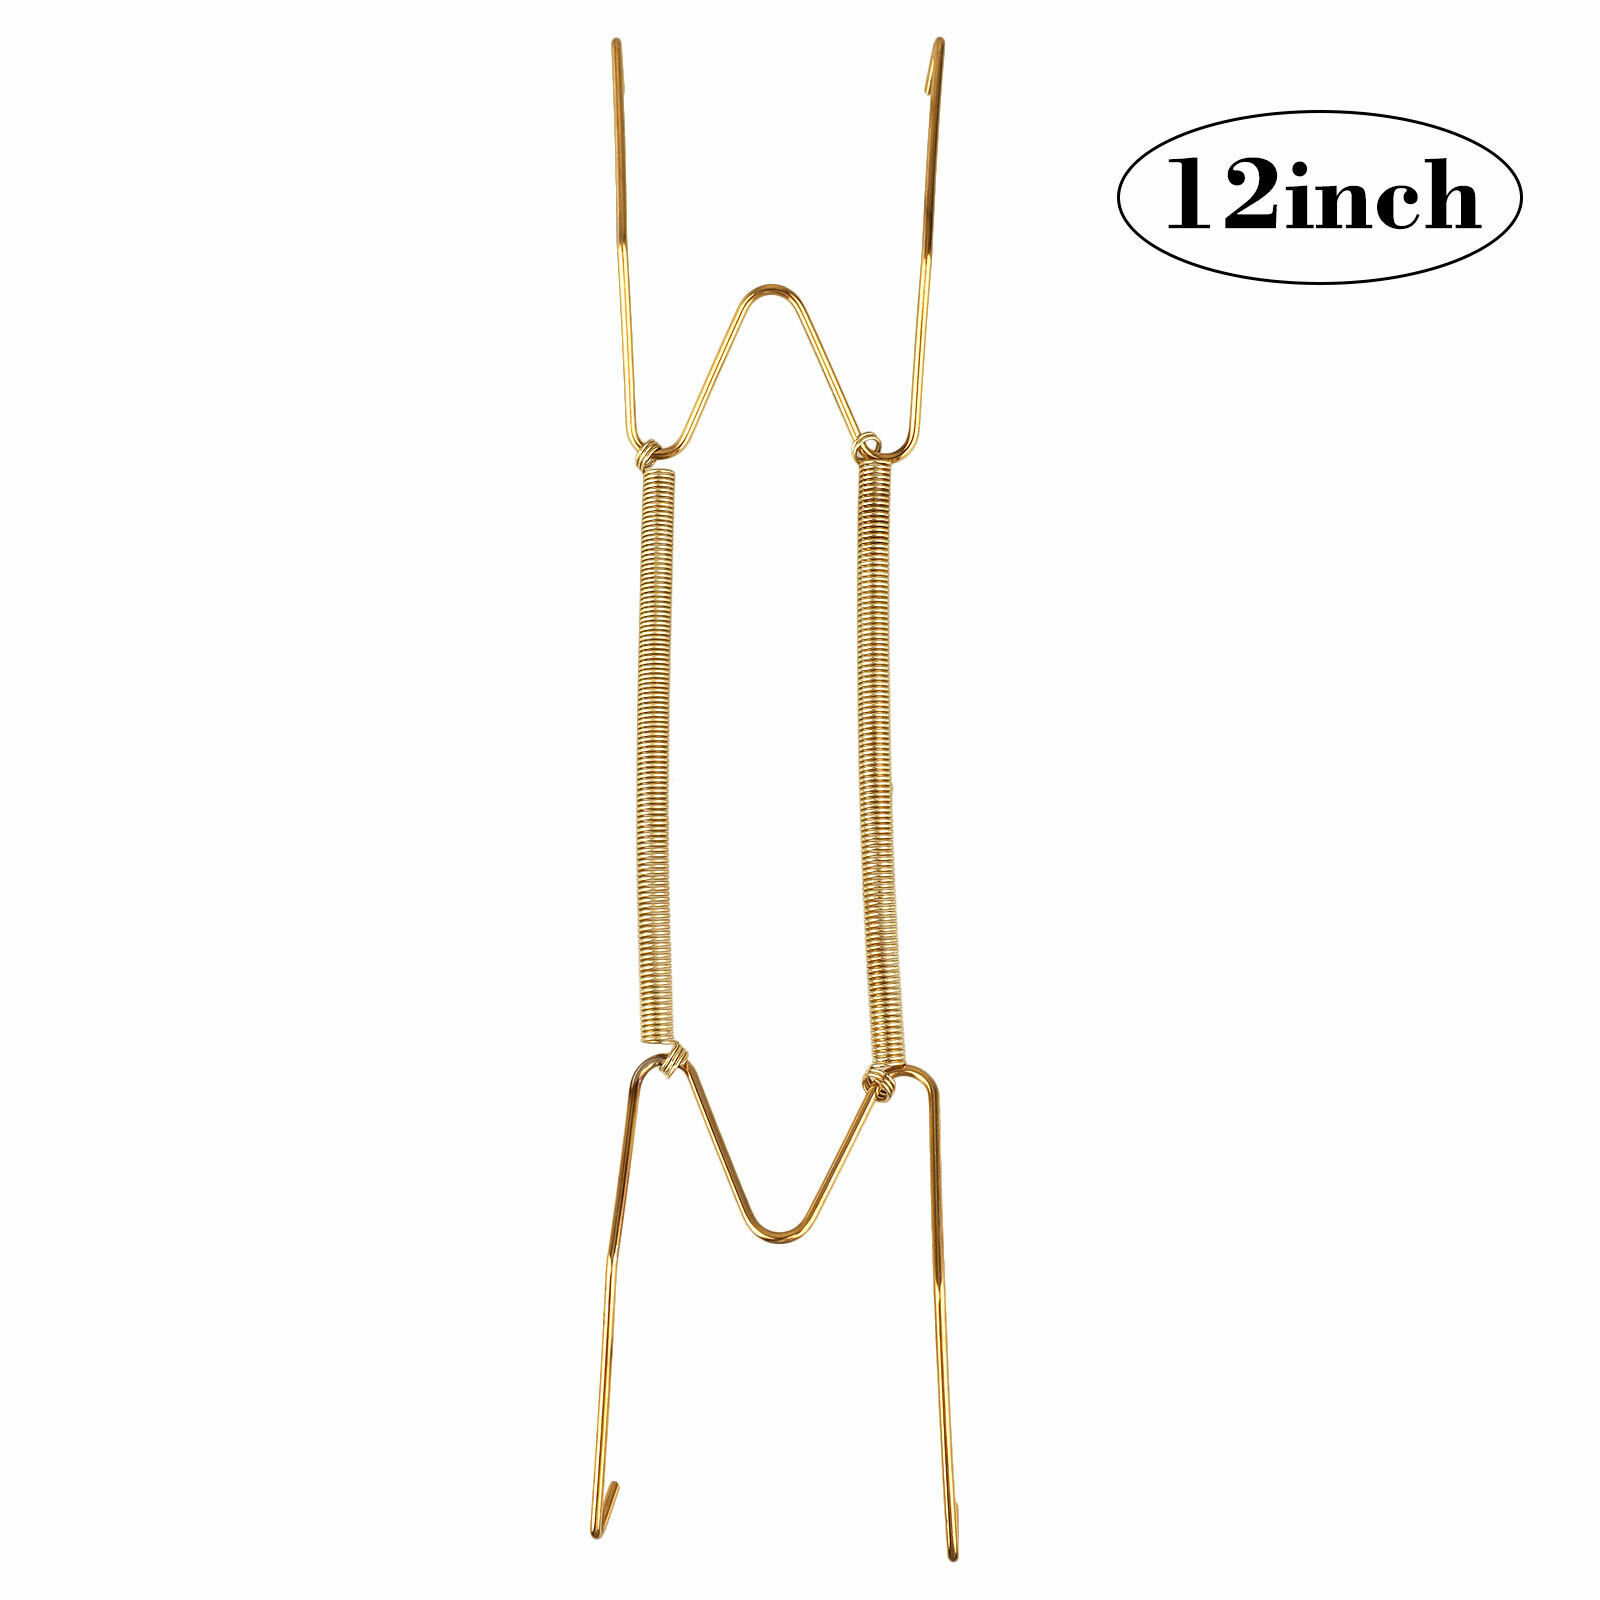 Details about   4pcs U-Shape Wall Display Plate Dish Hangers For Home Decor 8/10inch Holder Art 